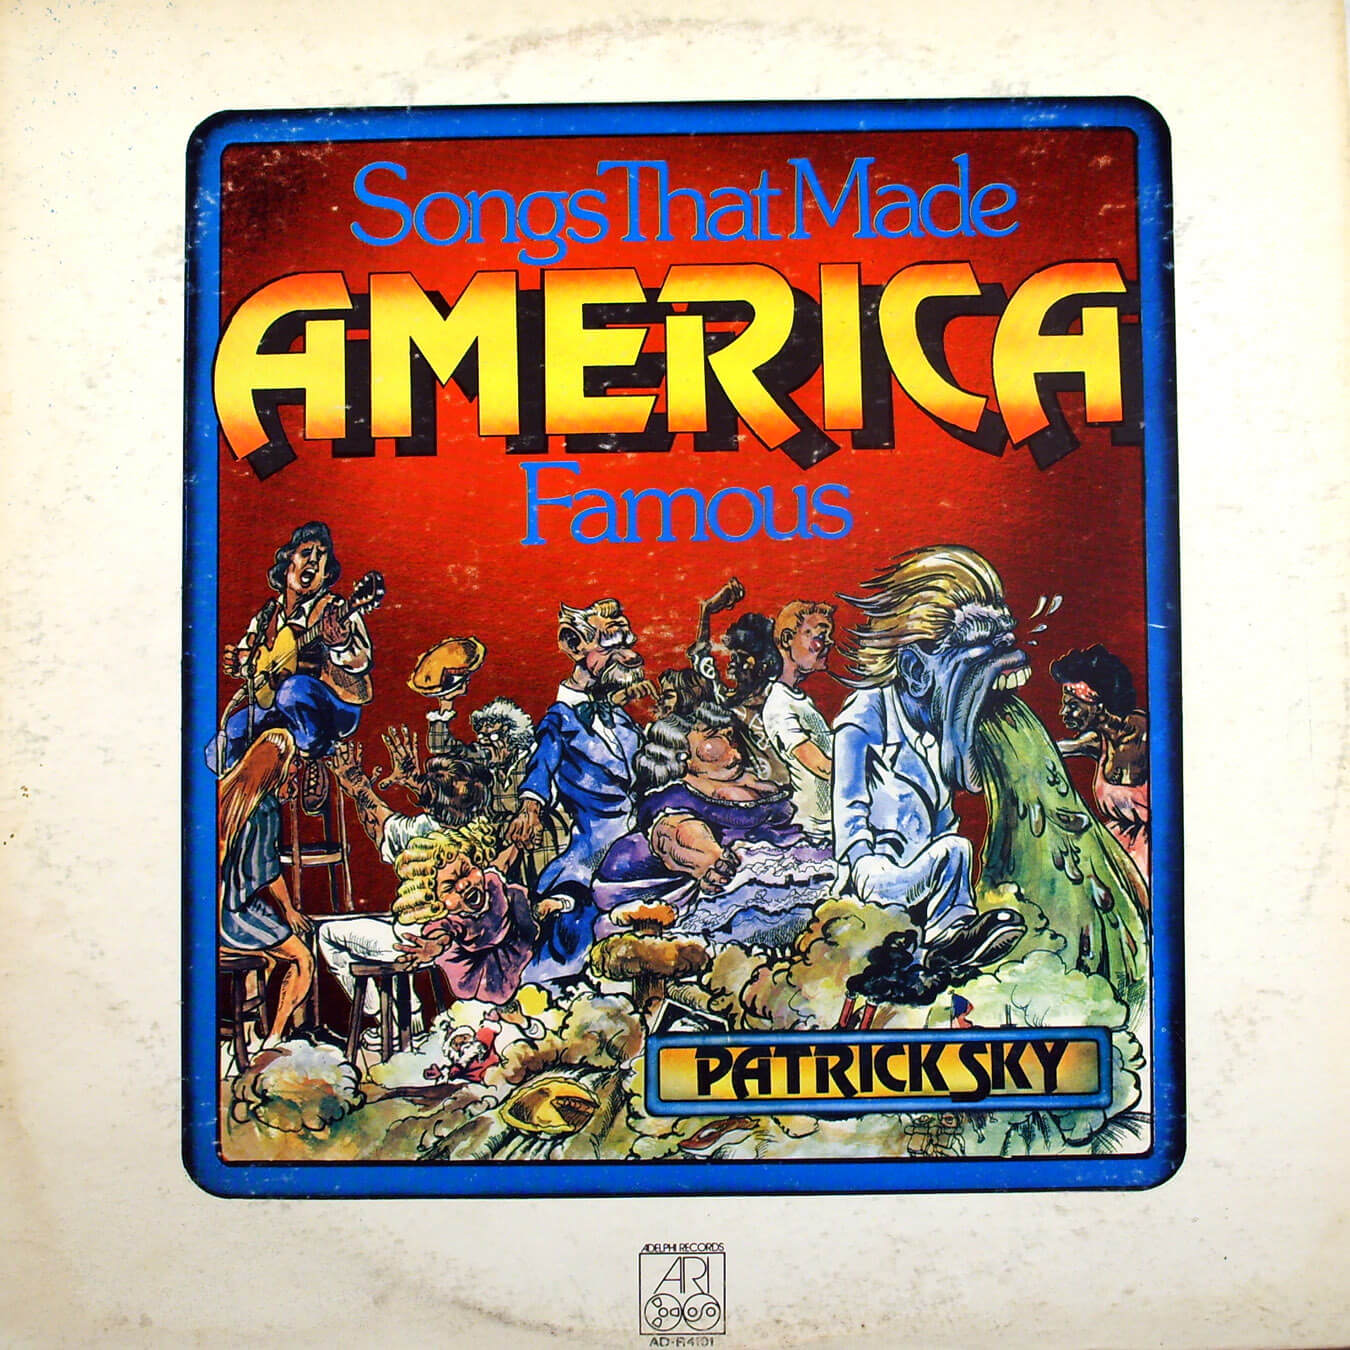 patrick-sky-songs-that-made-america-famous-front3